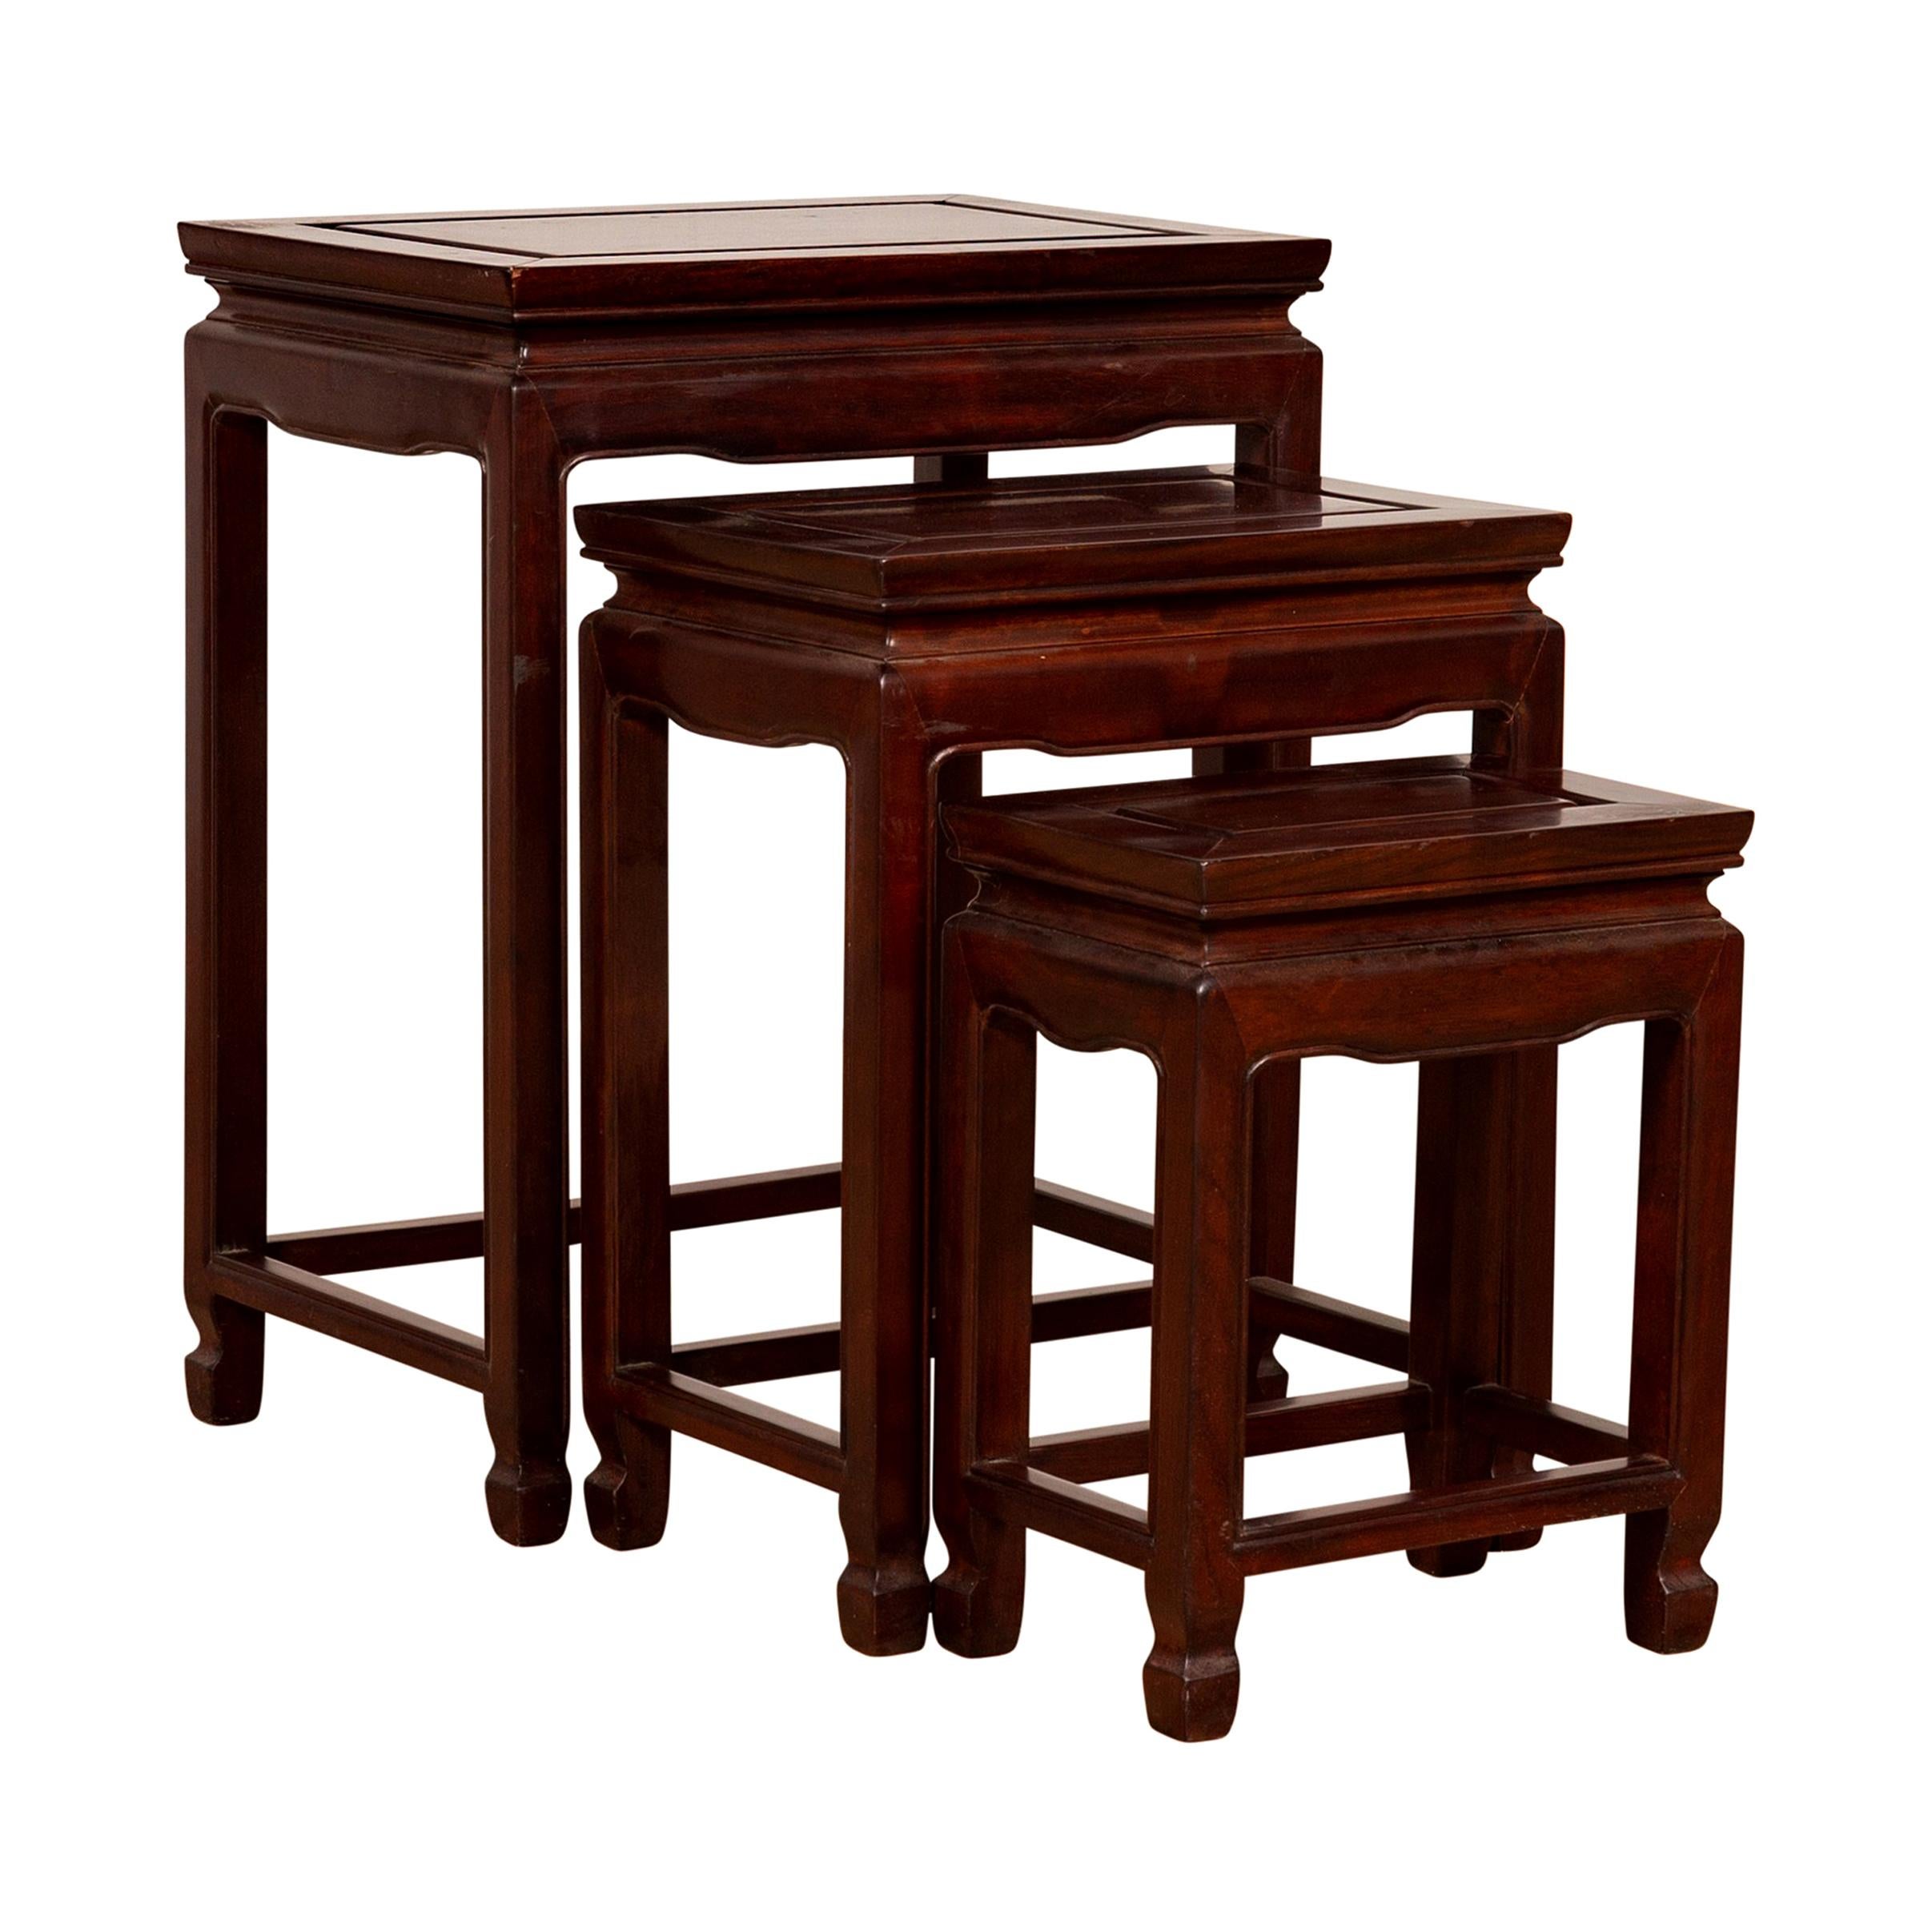 Set of Three Vintage Chinese Rosewood Nesting Tables with Dark Patina